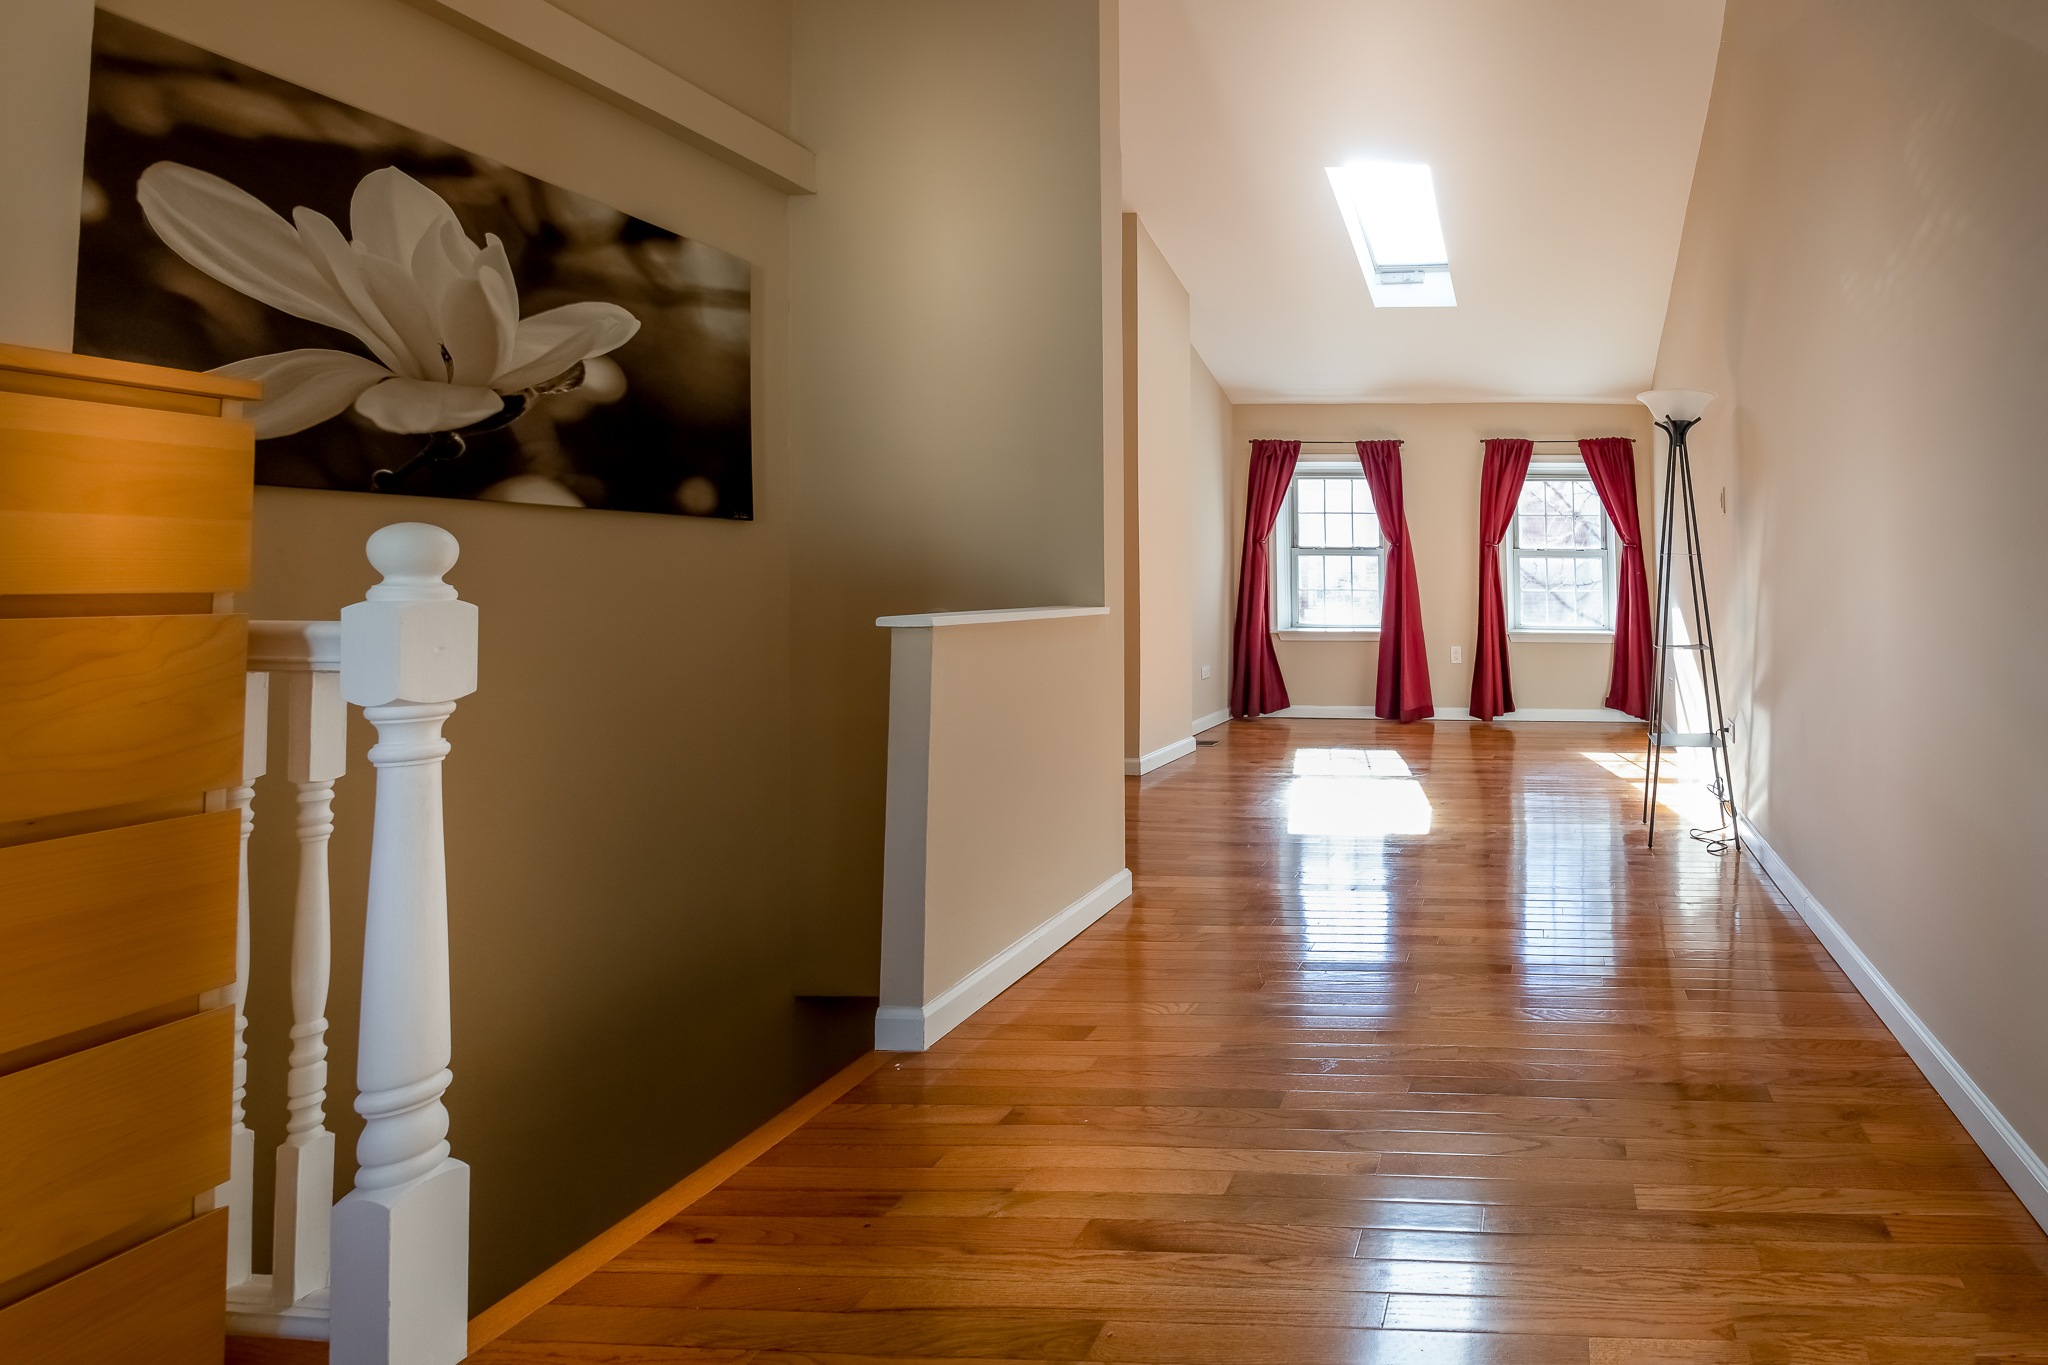 house for sale queen village kater street trinity master bedroom